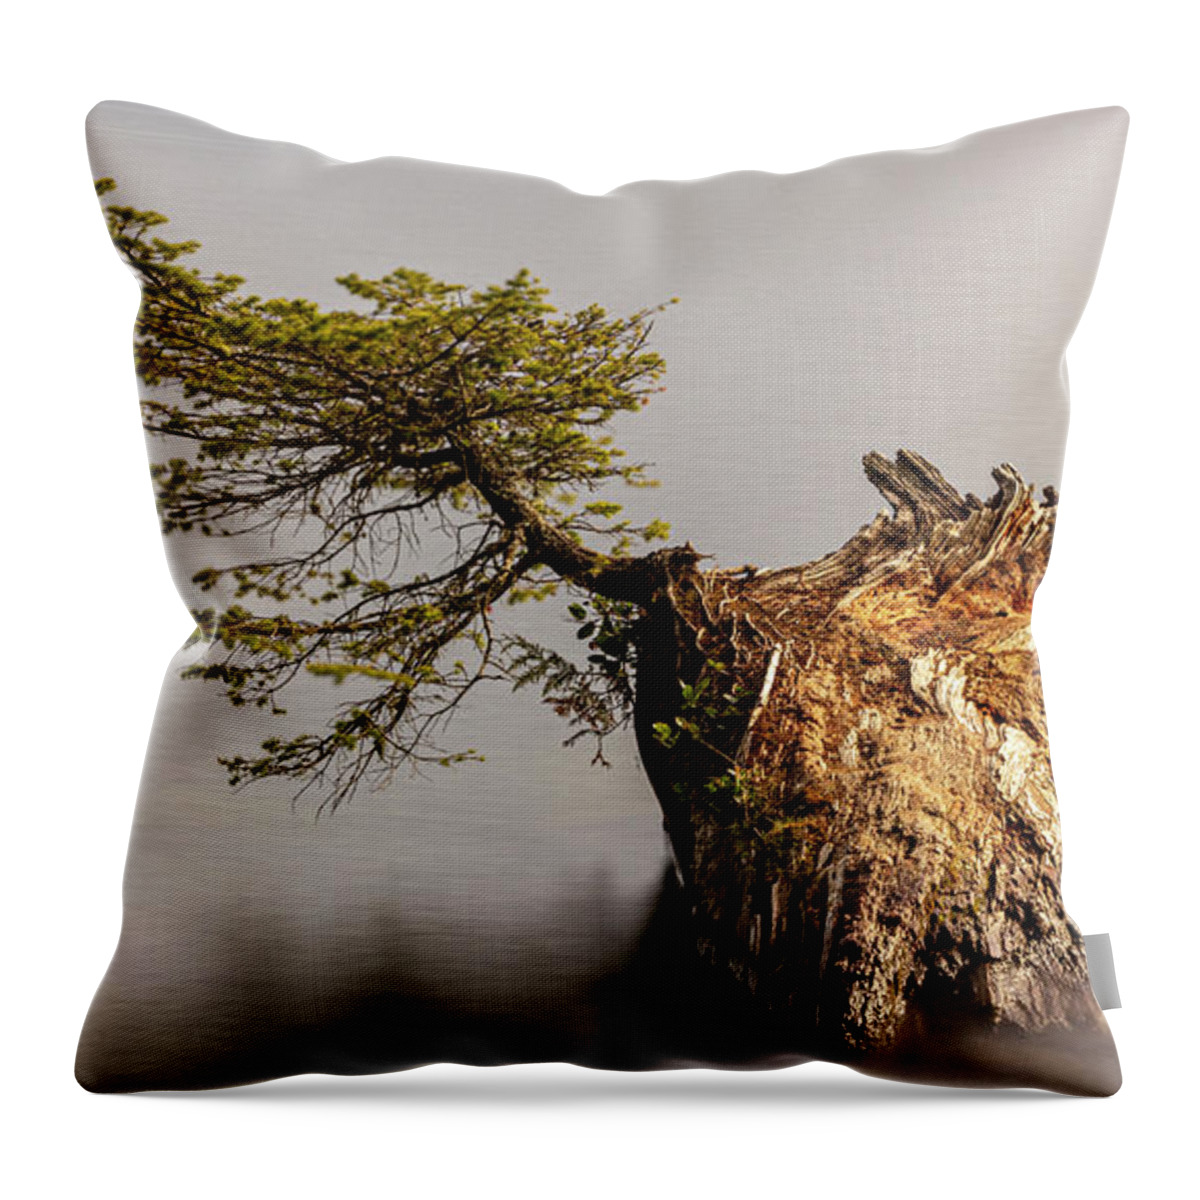 Landscape Throw Pillow featuring the photograph New Growth From Fallen Tree by Tony Locke